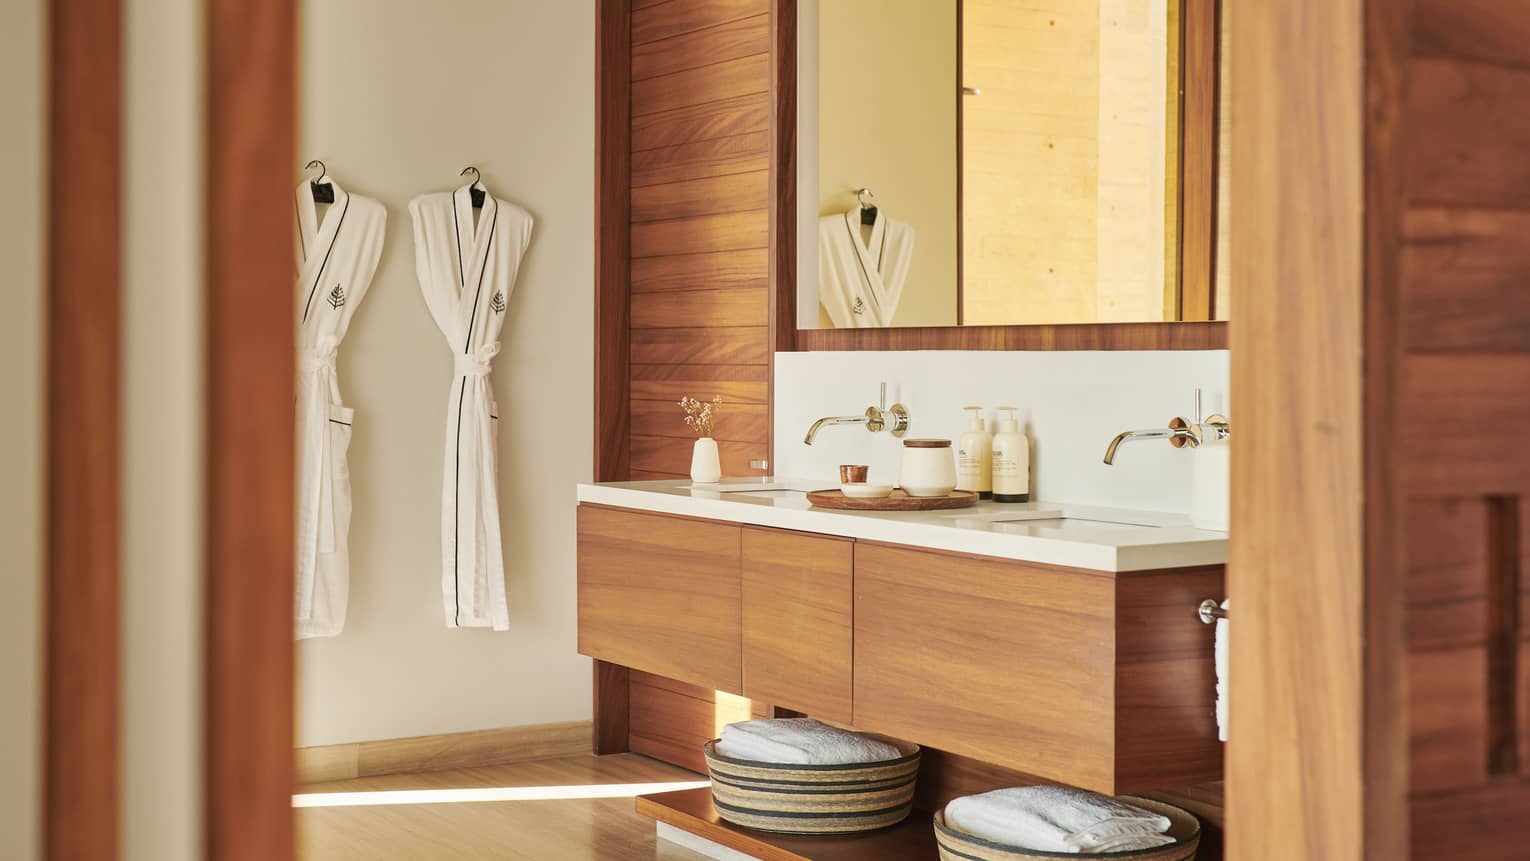 Modern bathroom with wood vanity and walls, two hanging bathrobes